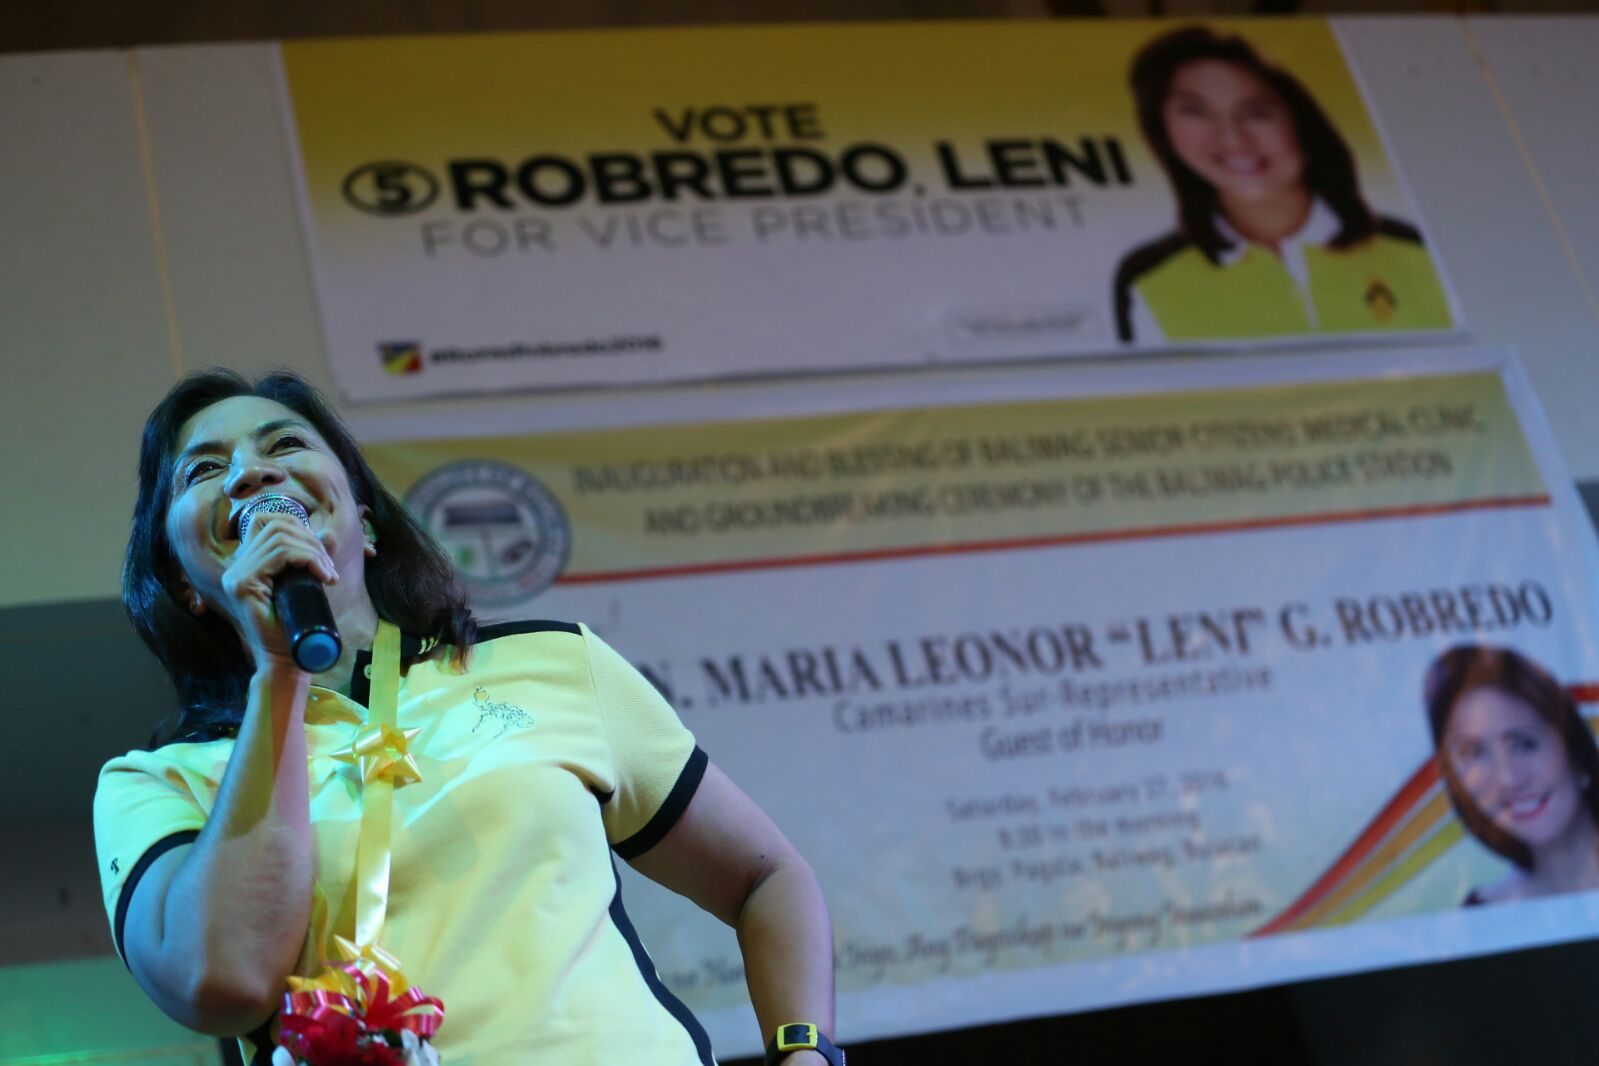 Robredo: Marcos doesn’t deserve burial in Heroes’ Cemetery